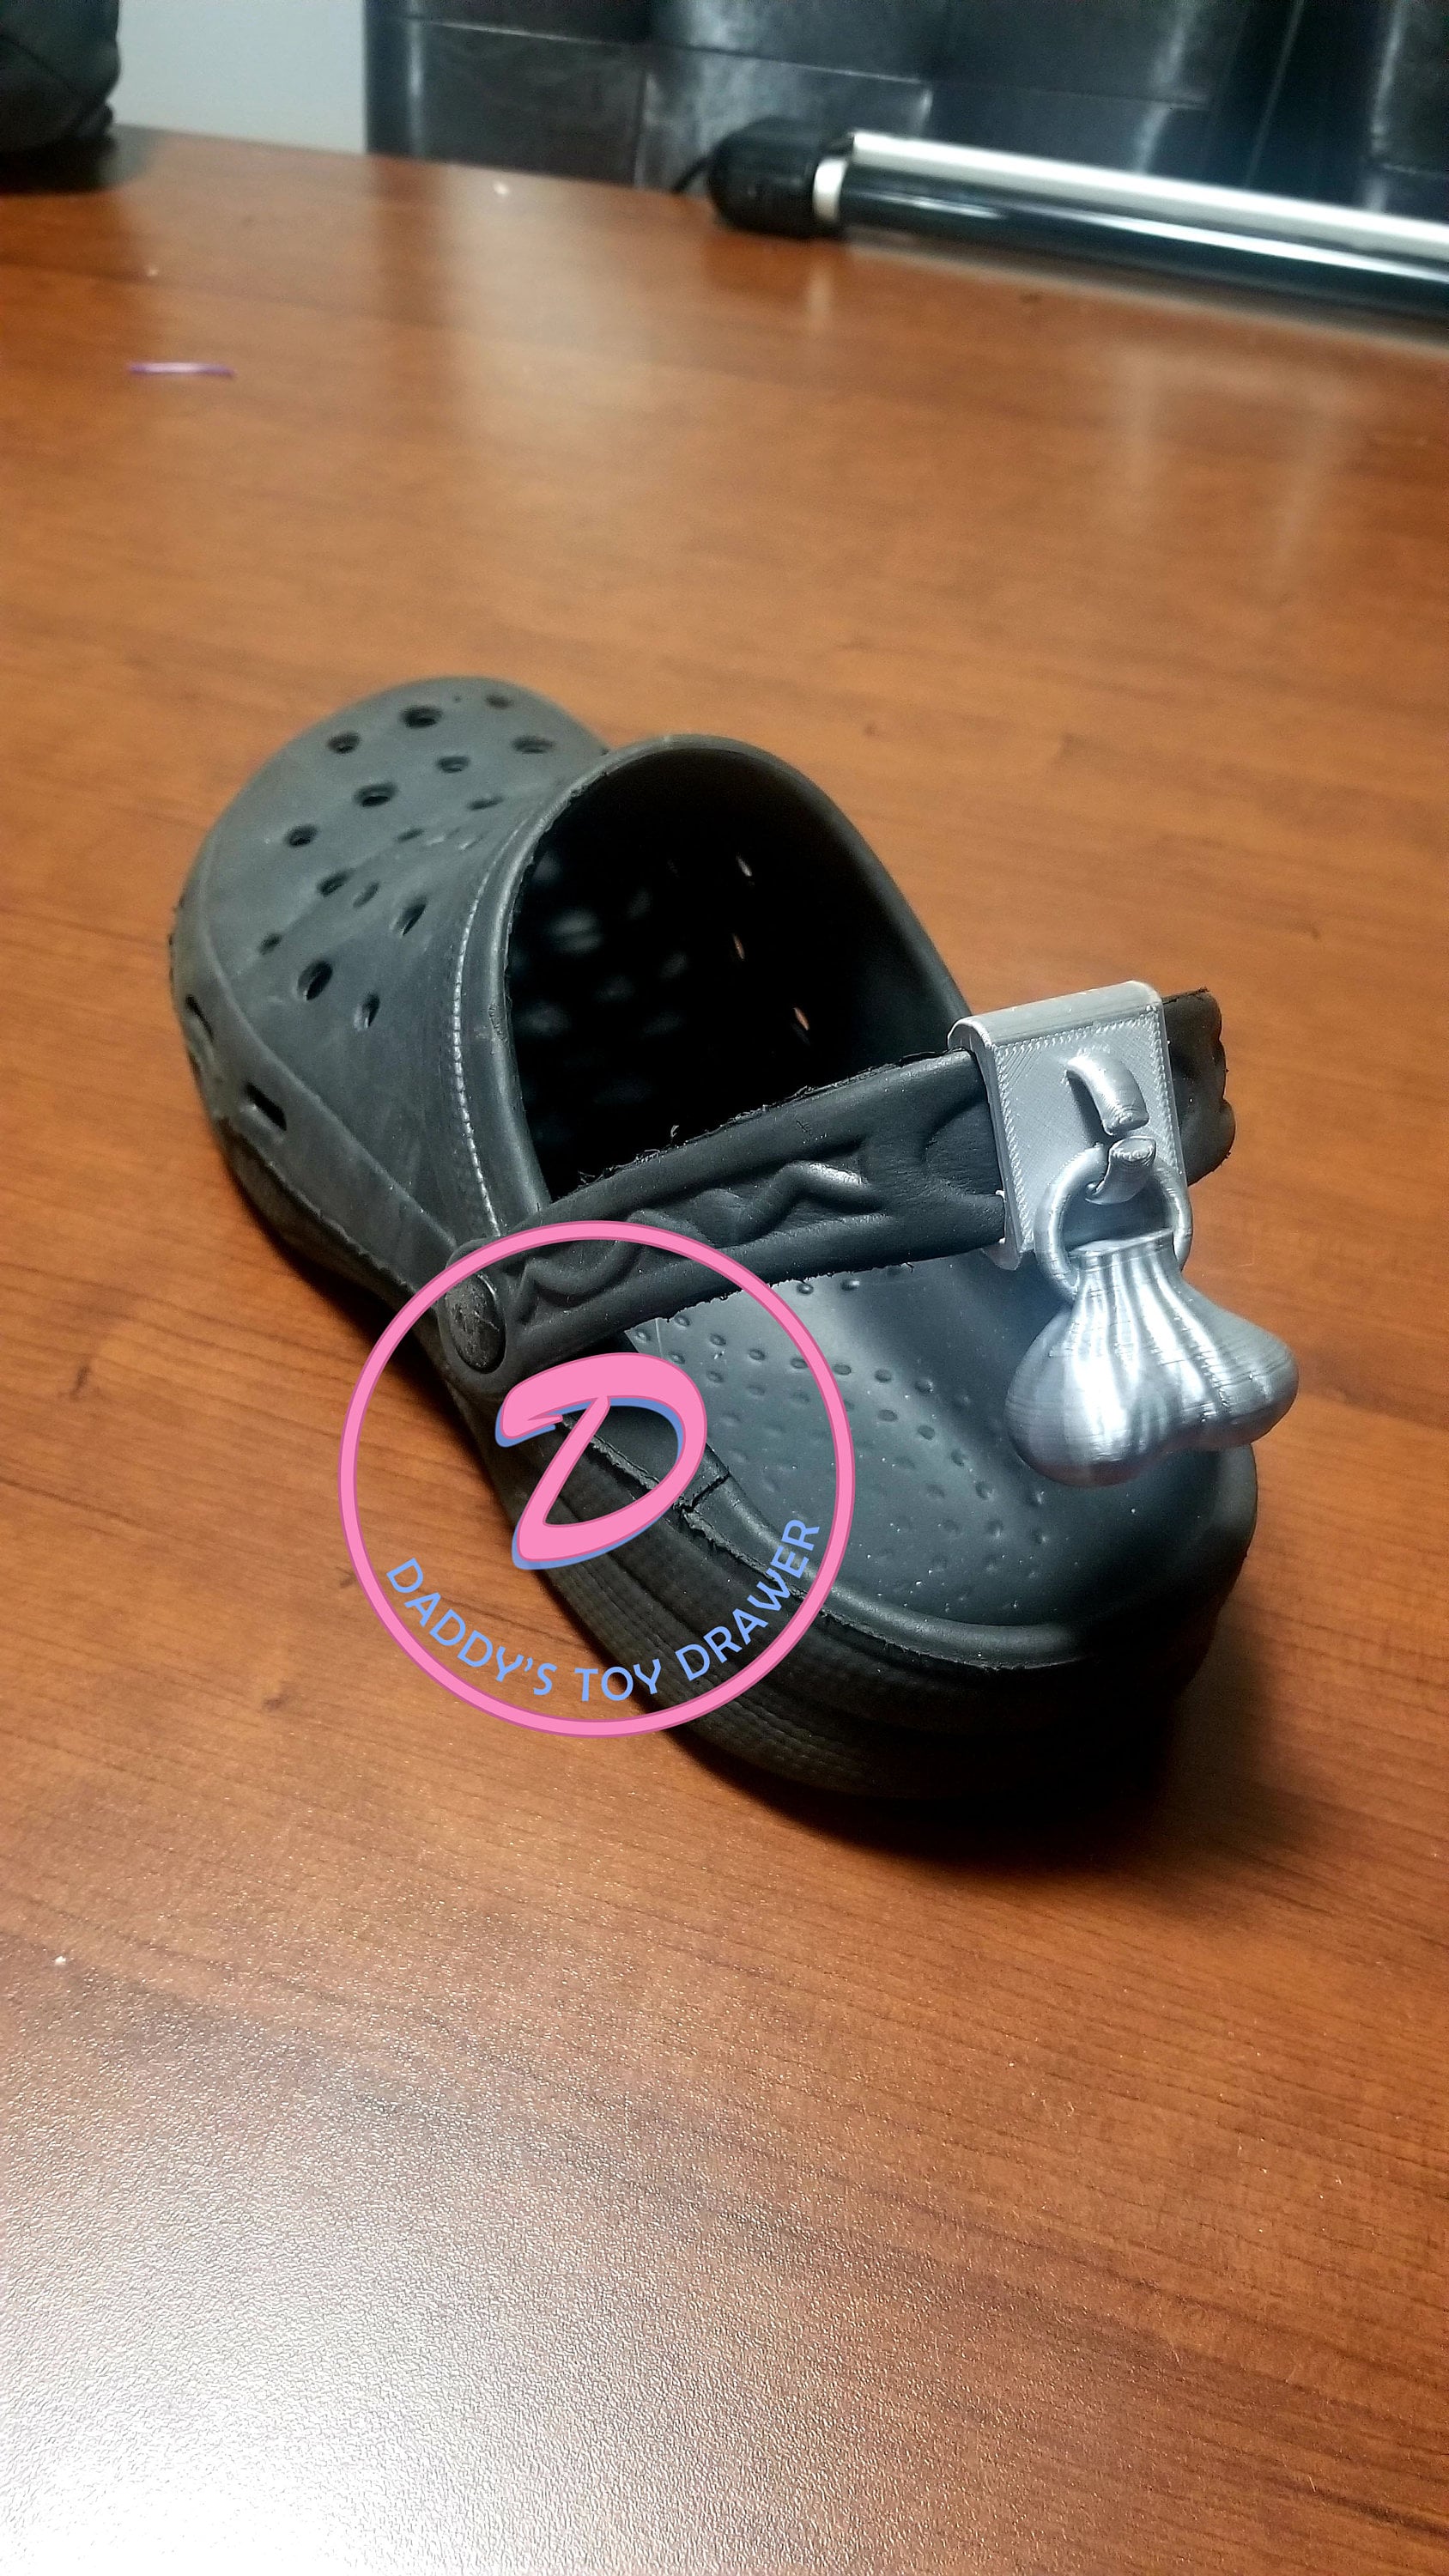 Croc Spoiler Accessory set of 2 Funny car Spoiler Attachment for Crocs.  Fits on the Back Joke Gift 